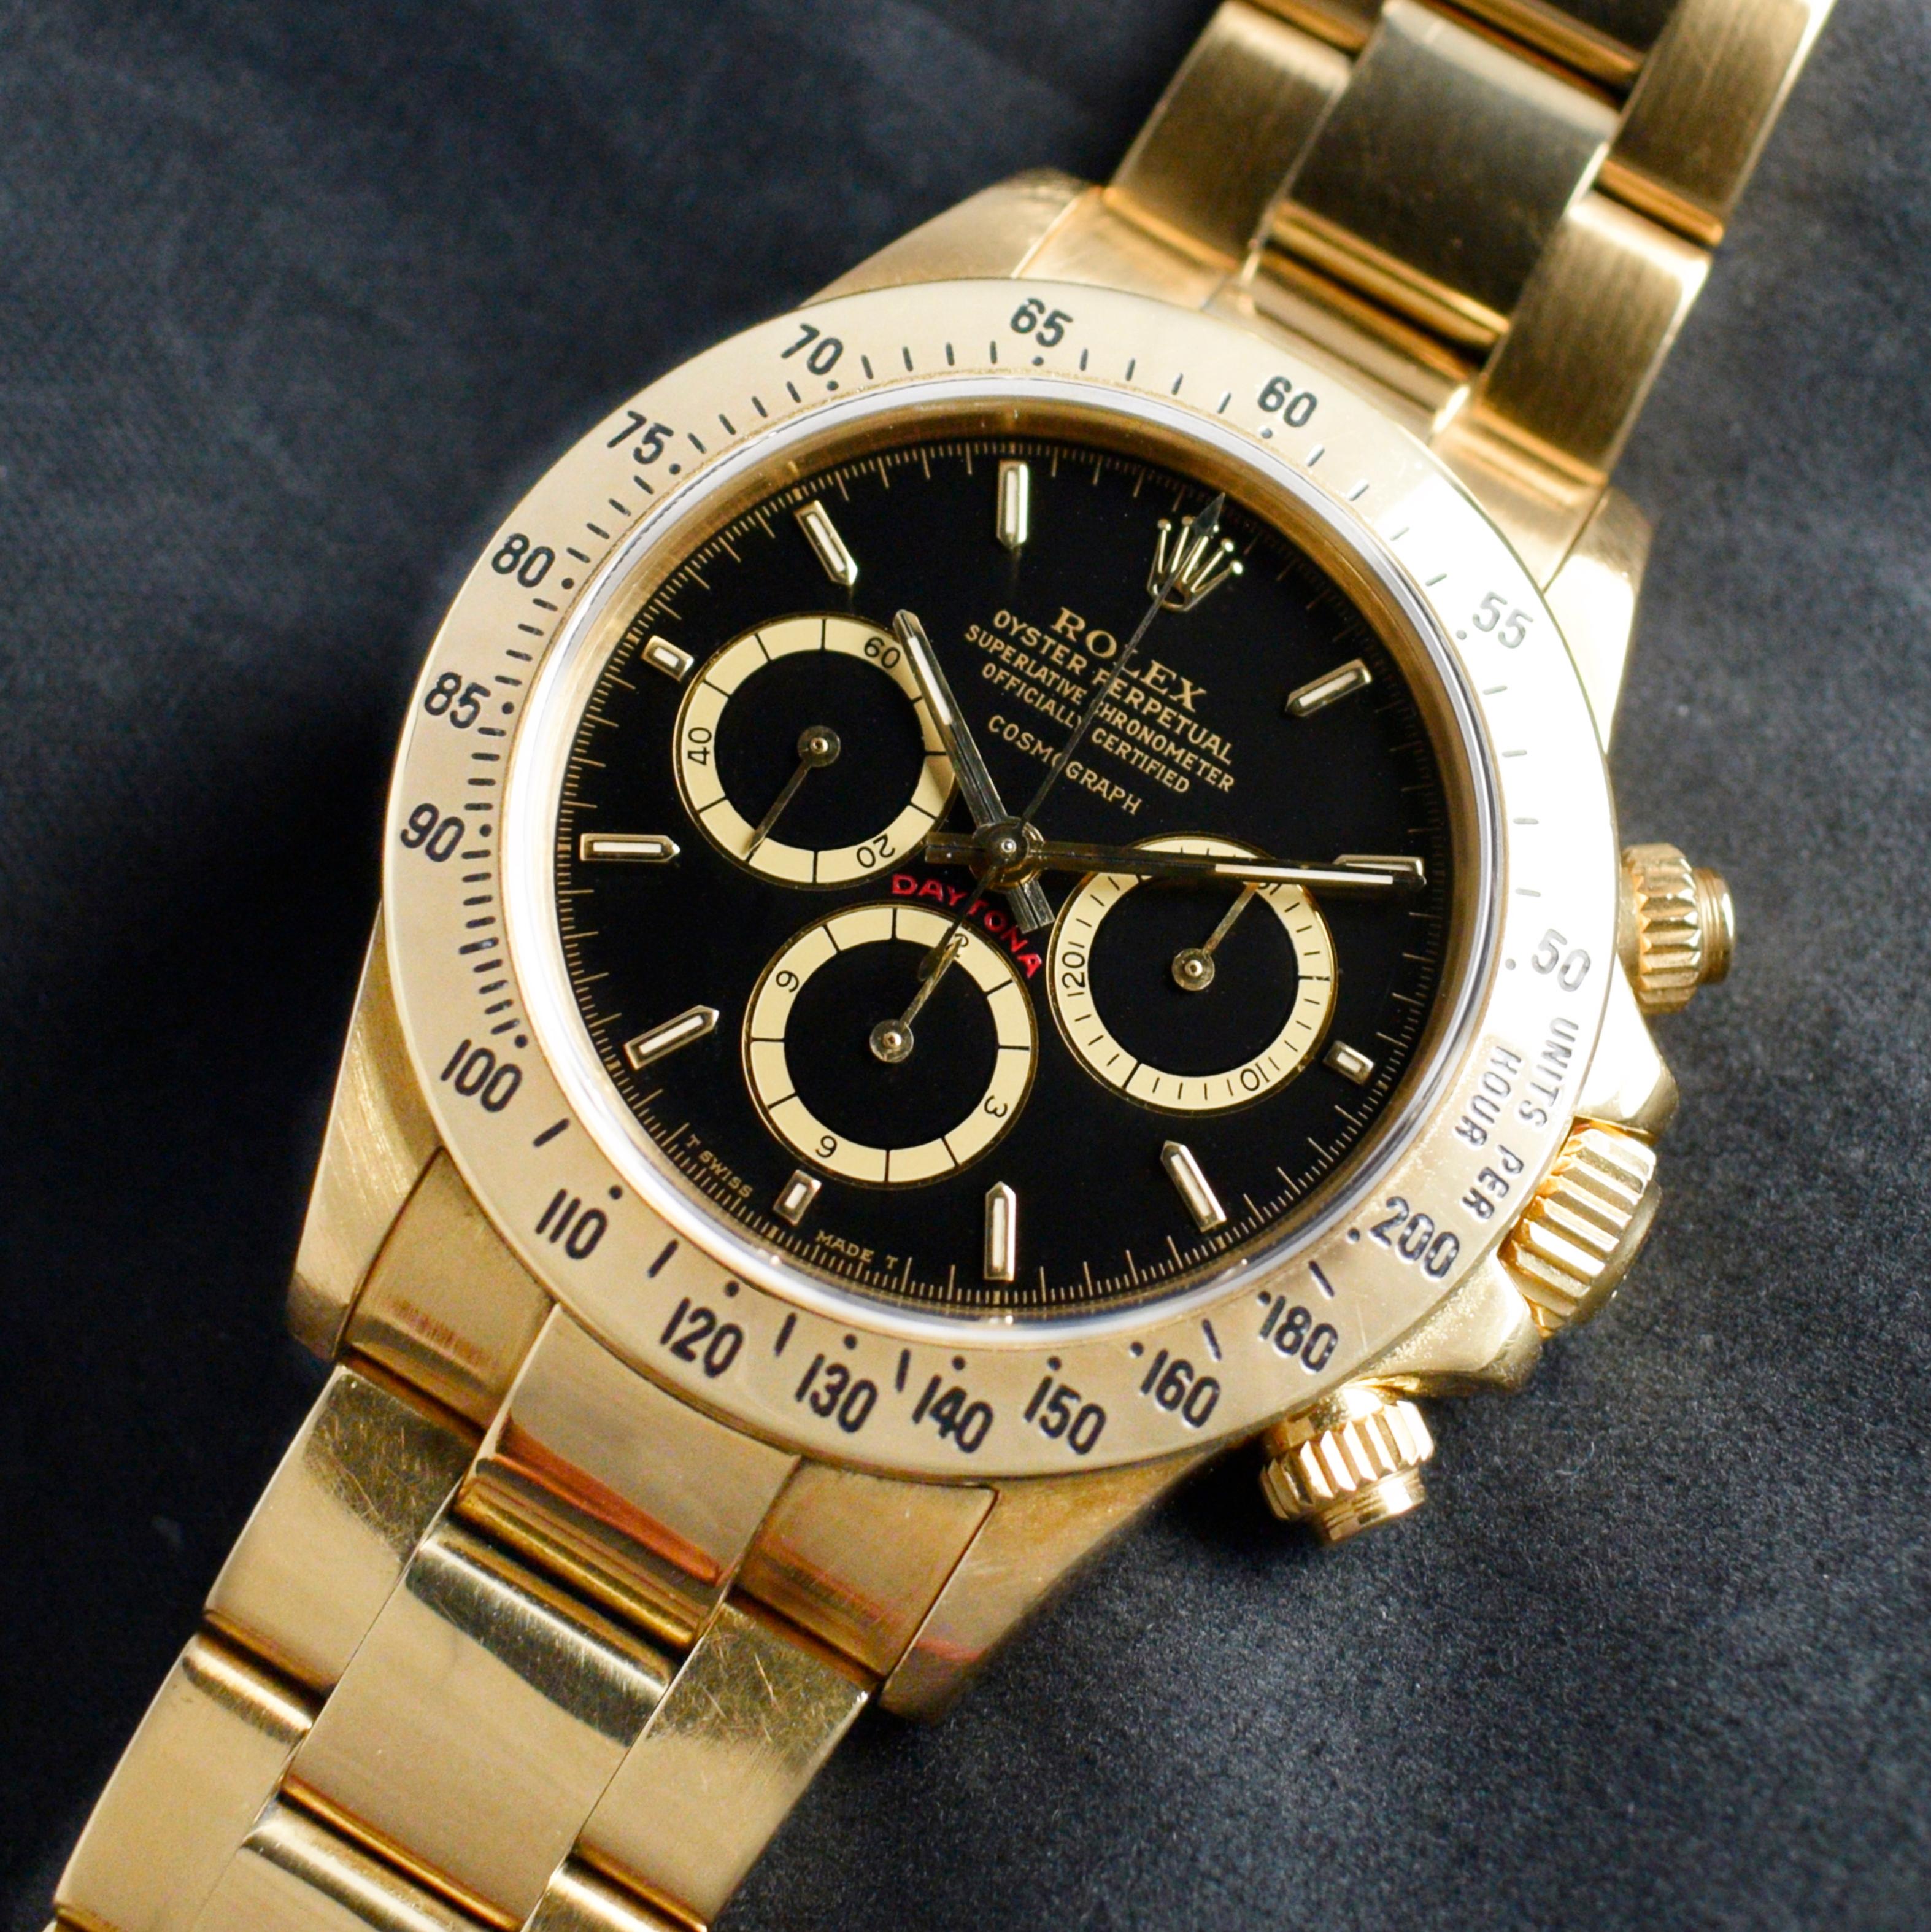 Brand: Rolex
Model: 16528
Year: 1988-1989
Serial number: L5xxxxx
Reference: OT1602

Rolex retired the 4-digit models vintage Daytona with hand-wound Valjoux movement and plexi crystals in 1988 and upgraded them with the new iconic Zenith-based